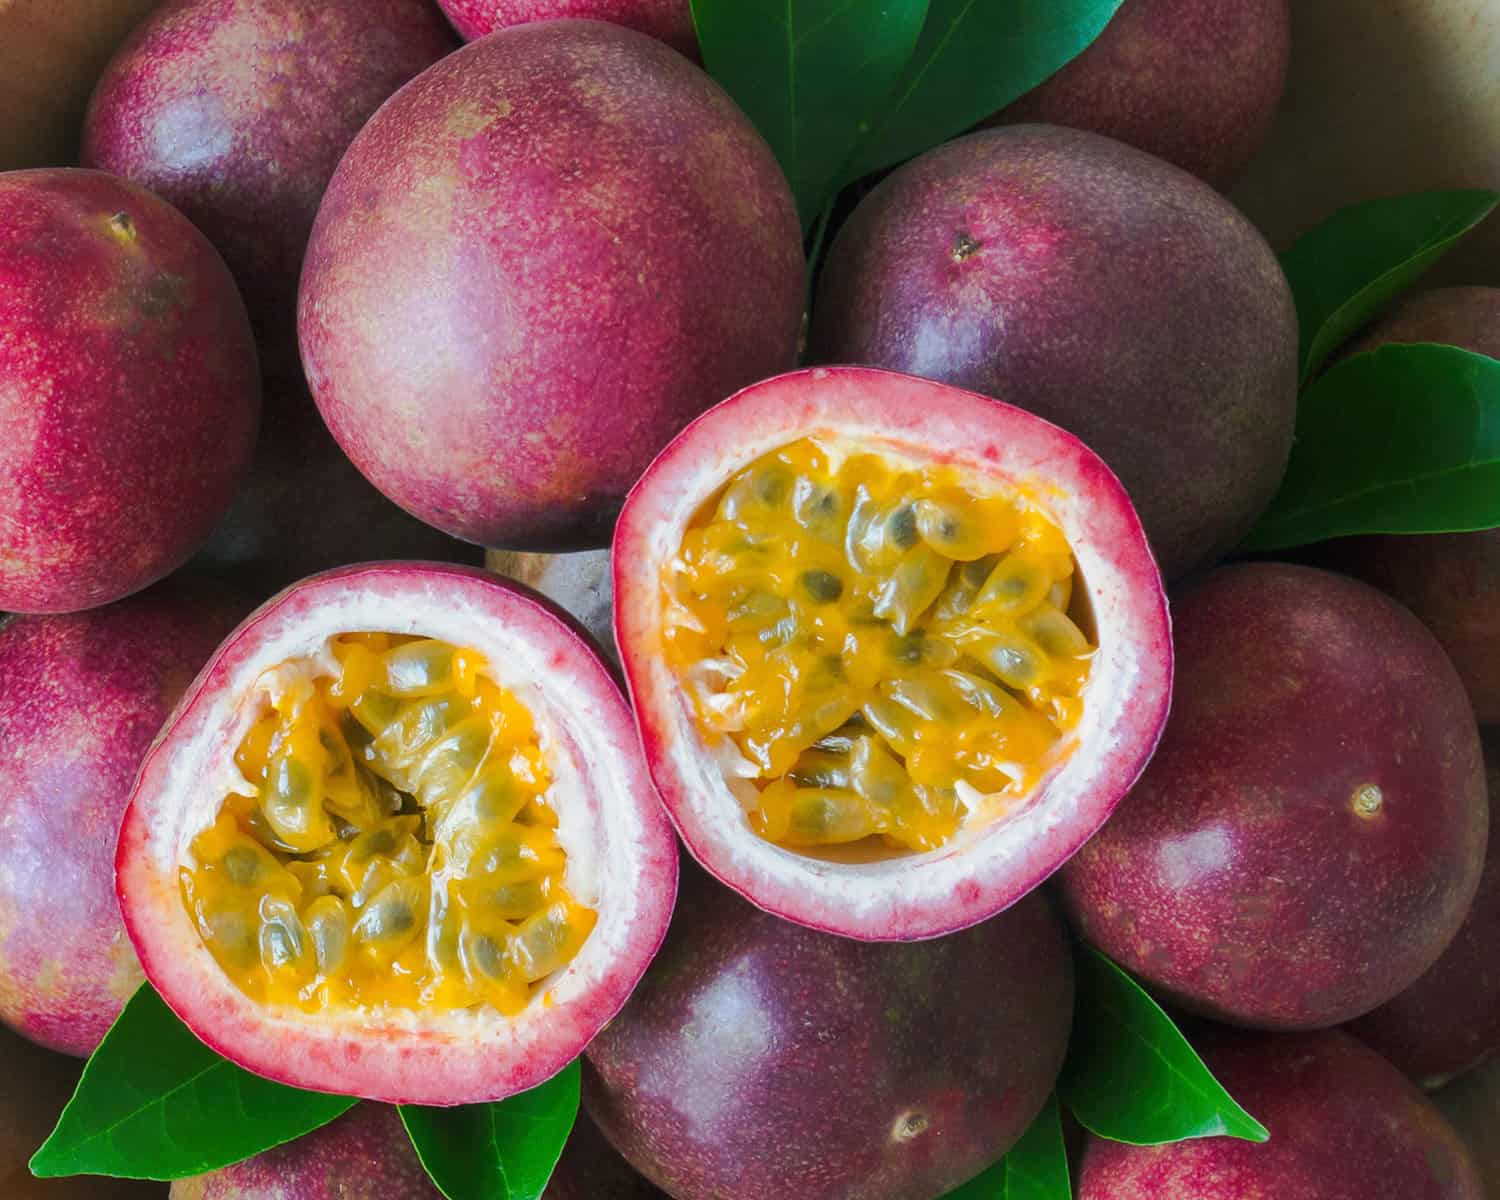 photo of a group of passionfruit, with one sliced open, revealing the inside of the fruit.